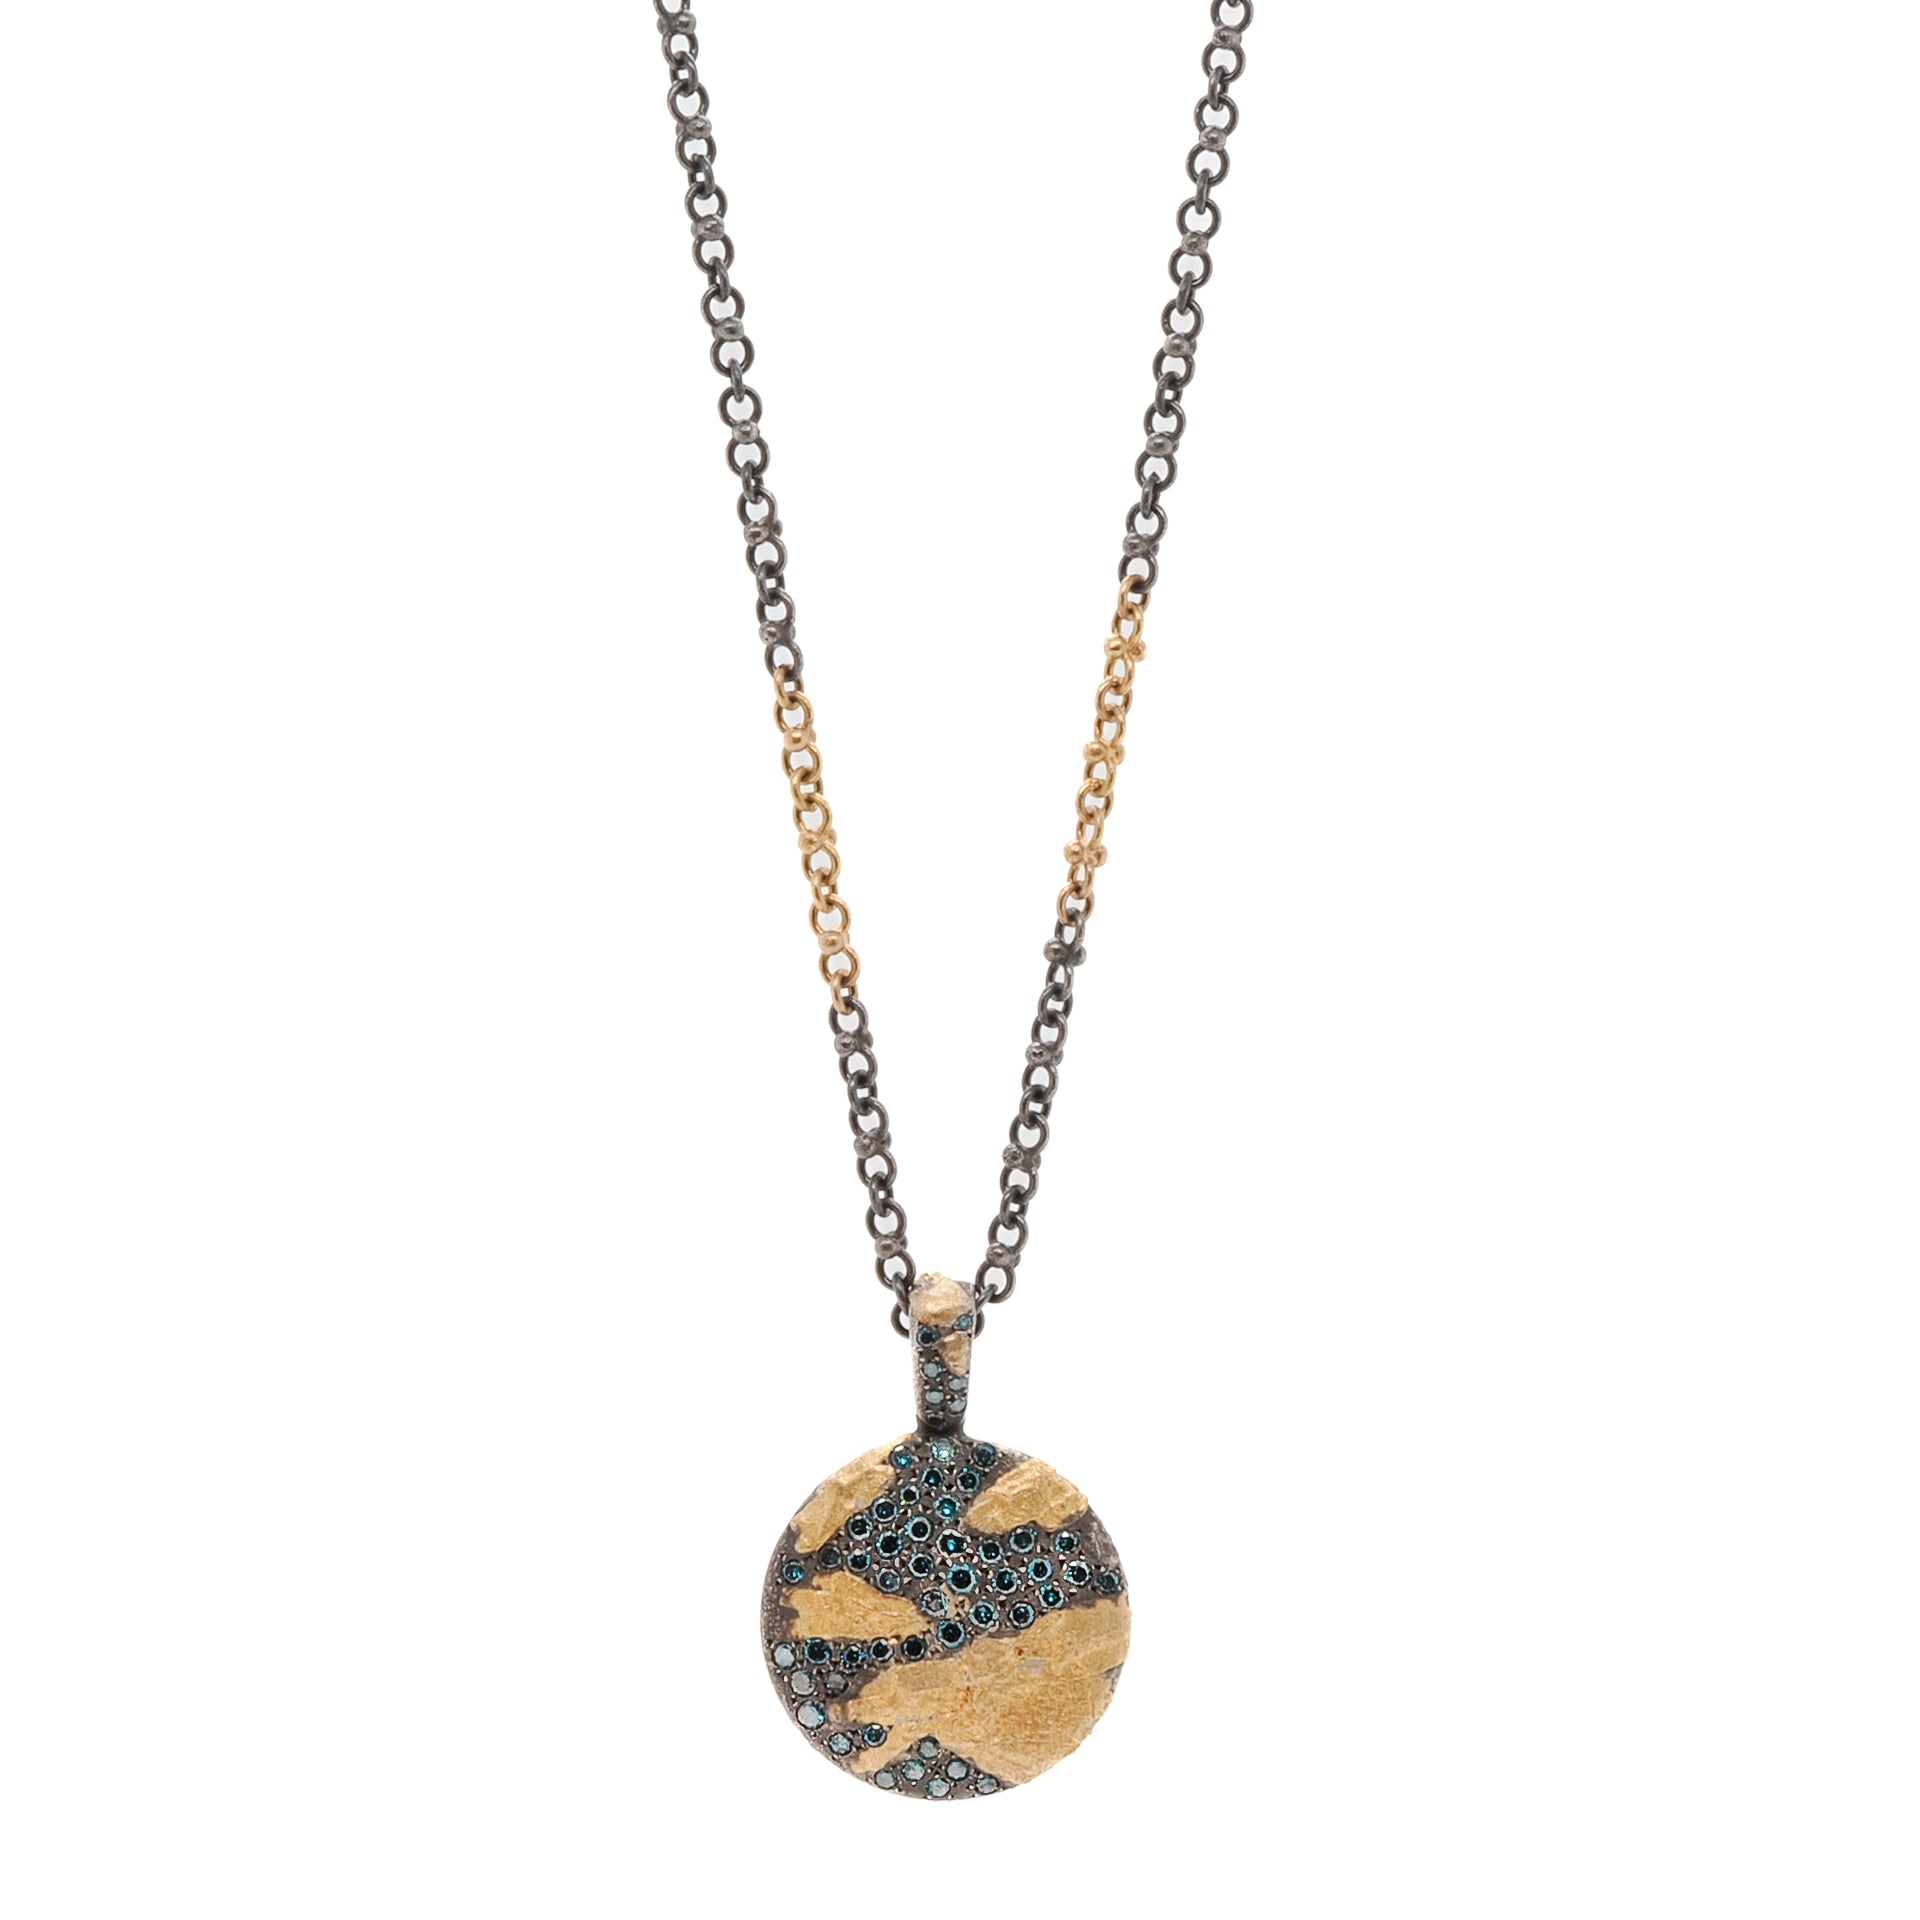 Nature Round Necklace featuring a stunning handmade design crafted with 21k gold over silver surface and adorned with 1.25 carats of petroleum diamonds.